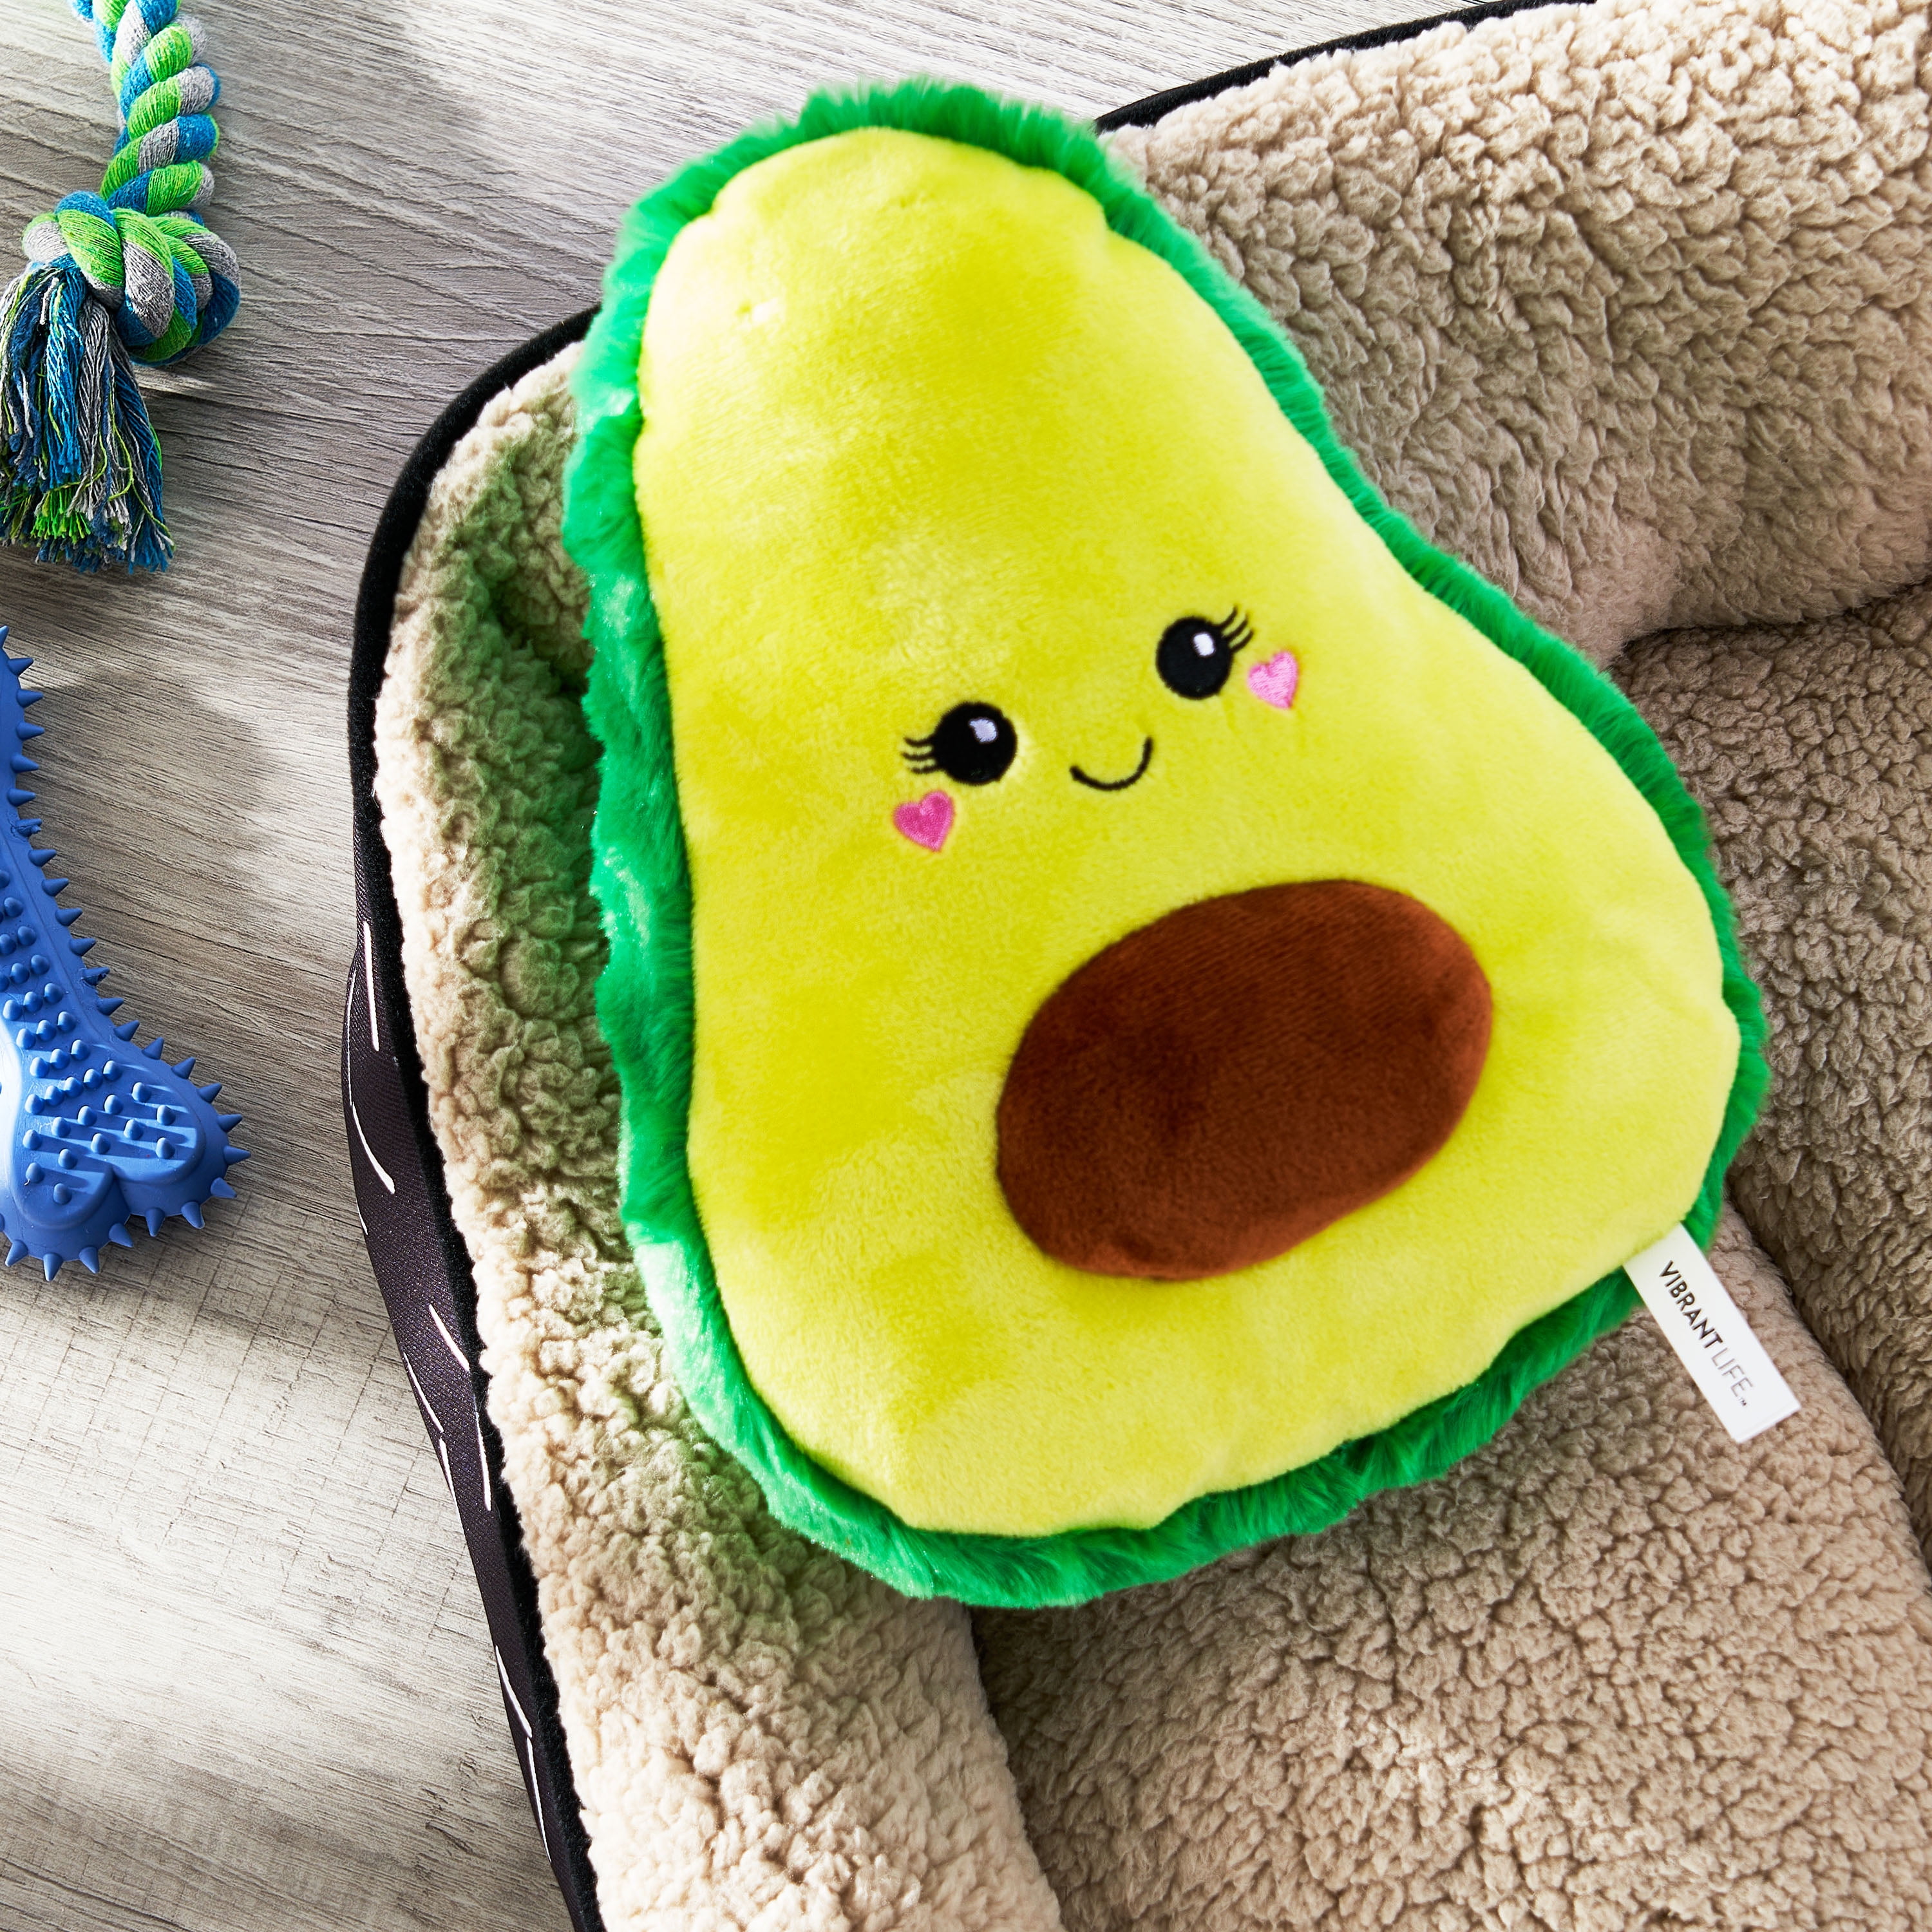 Chewia Avocado Dog Treat-dispensing Toy - Keep Your Pet Active and Healthy